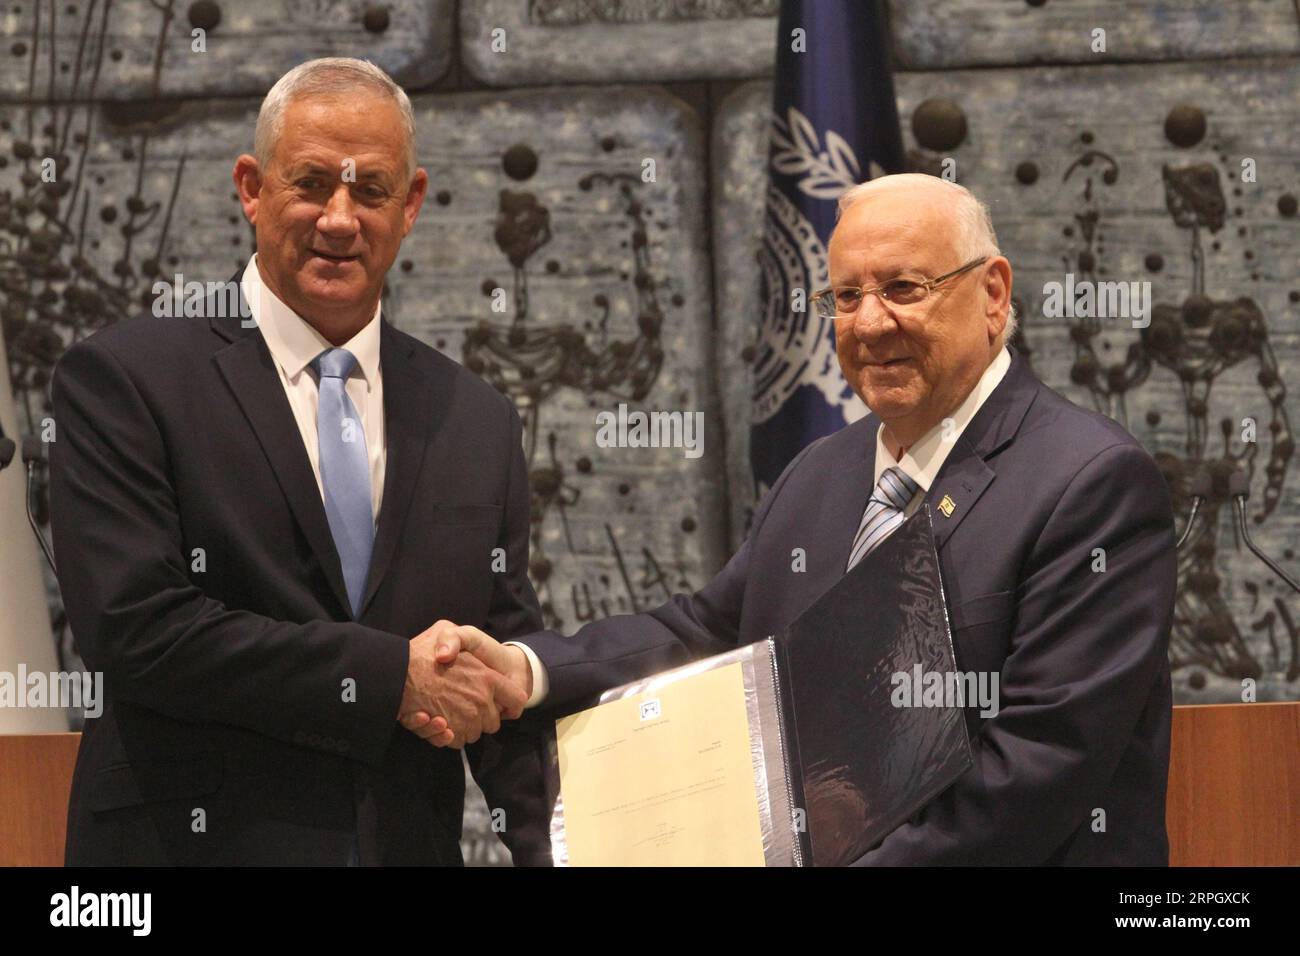 191023 -- JERUSALEM, Oct. 23, 2019 Xinhua -- Israeli President Reuven Rivlin R presents Blue and White party leader Benny Gantz with the mandate to form a new Israeli government at the President s residence in Jerusalem, on Oct. 23, 2019. Benny Gantz, Israel s former military chief, was given on Wednesday the mandate to form a new government after Prime Minister Benjamin Netanyahu s failure to do so amid a political deadlock. Photo by Gil Cohen Magen/Xinhua MIDEAST-JERUSALEM-BENNY GANTZ-MANDATE- GOVERNMENT FORMING PUBLICATIONxNOTxINxCHN Stock Photo